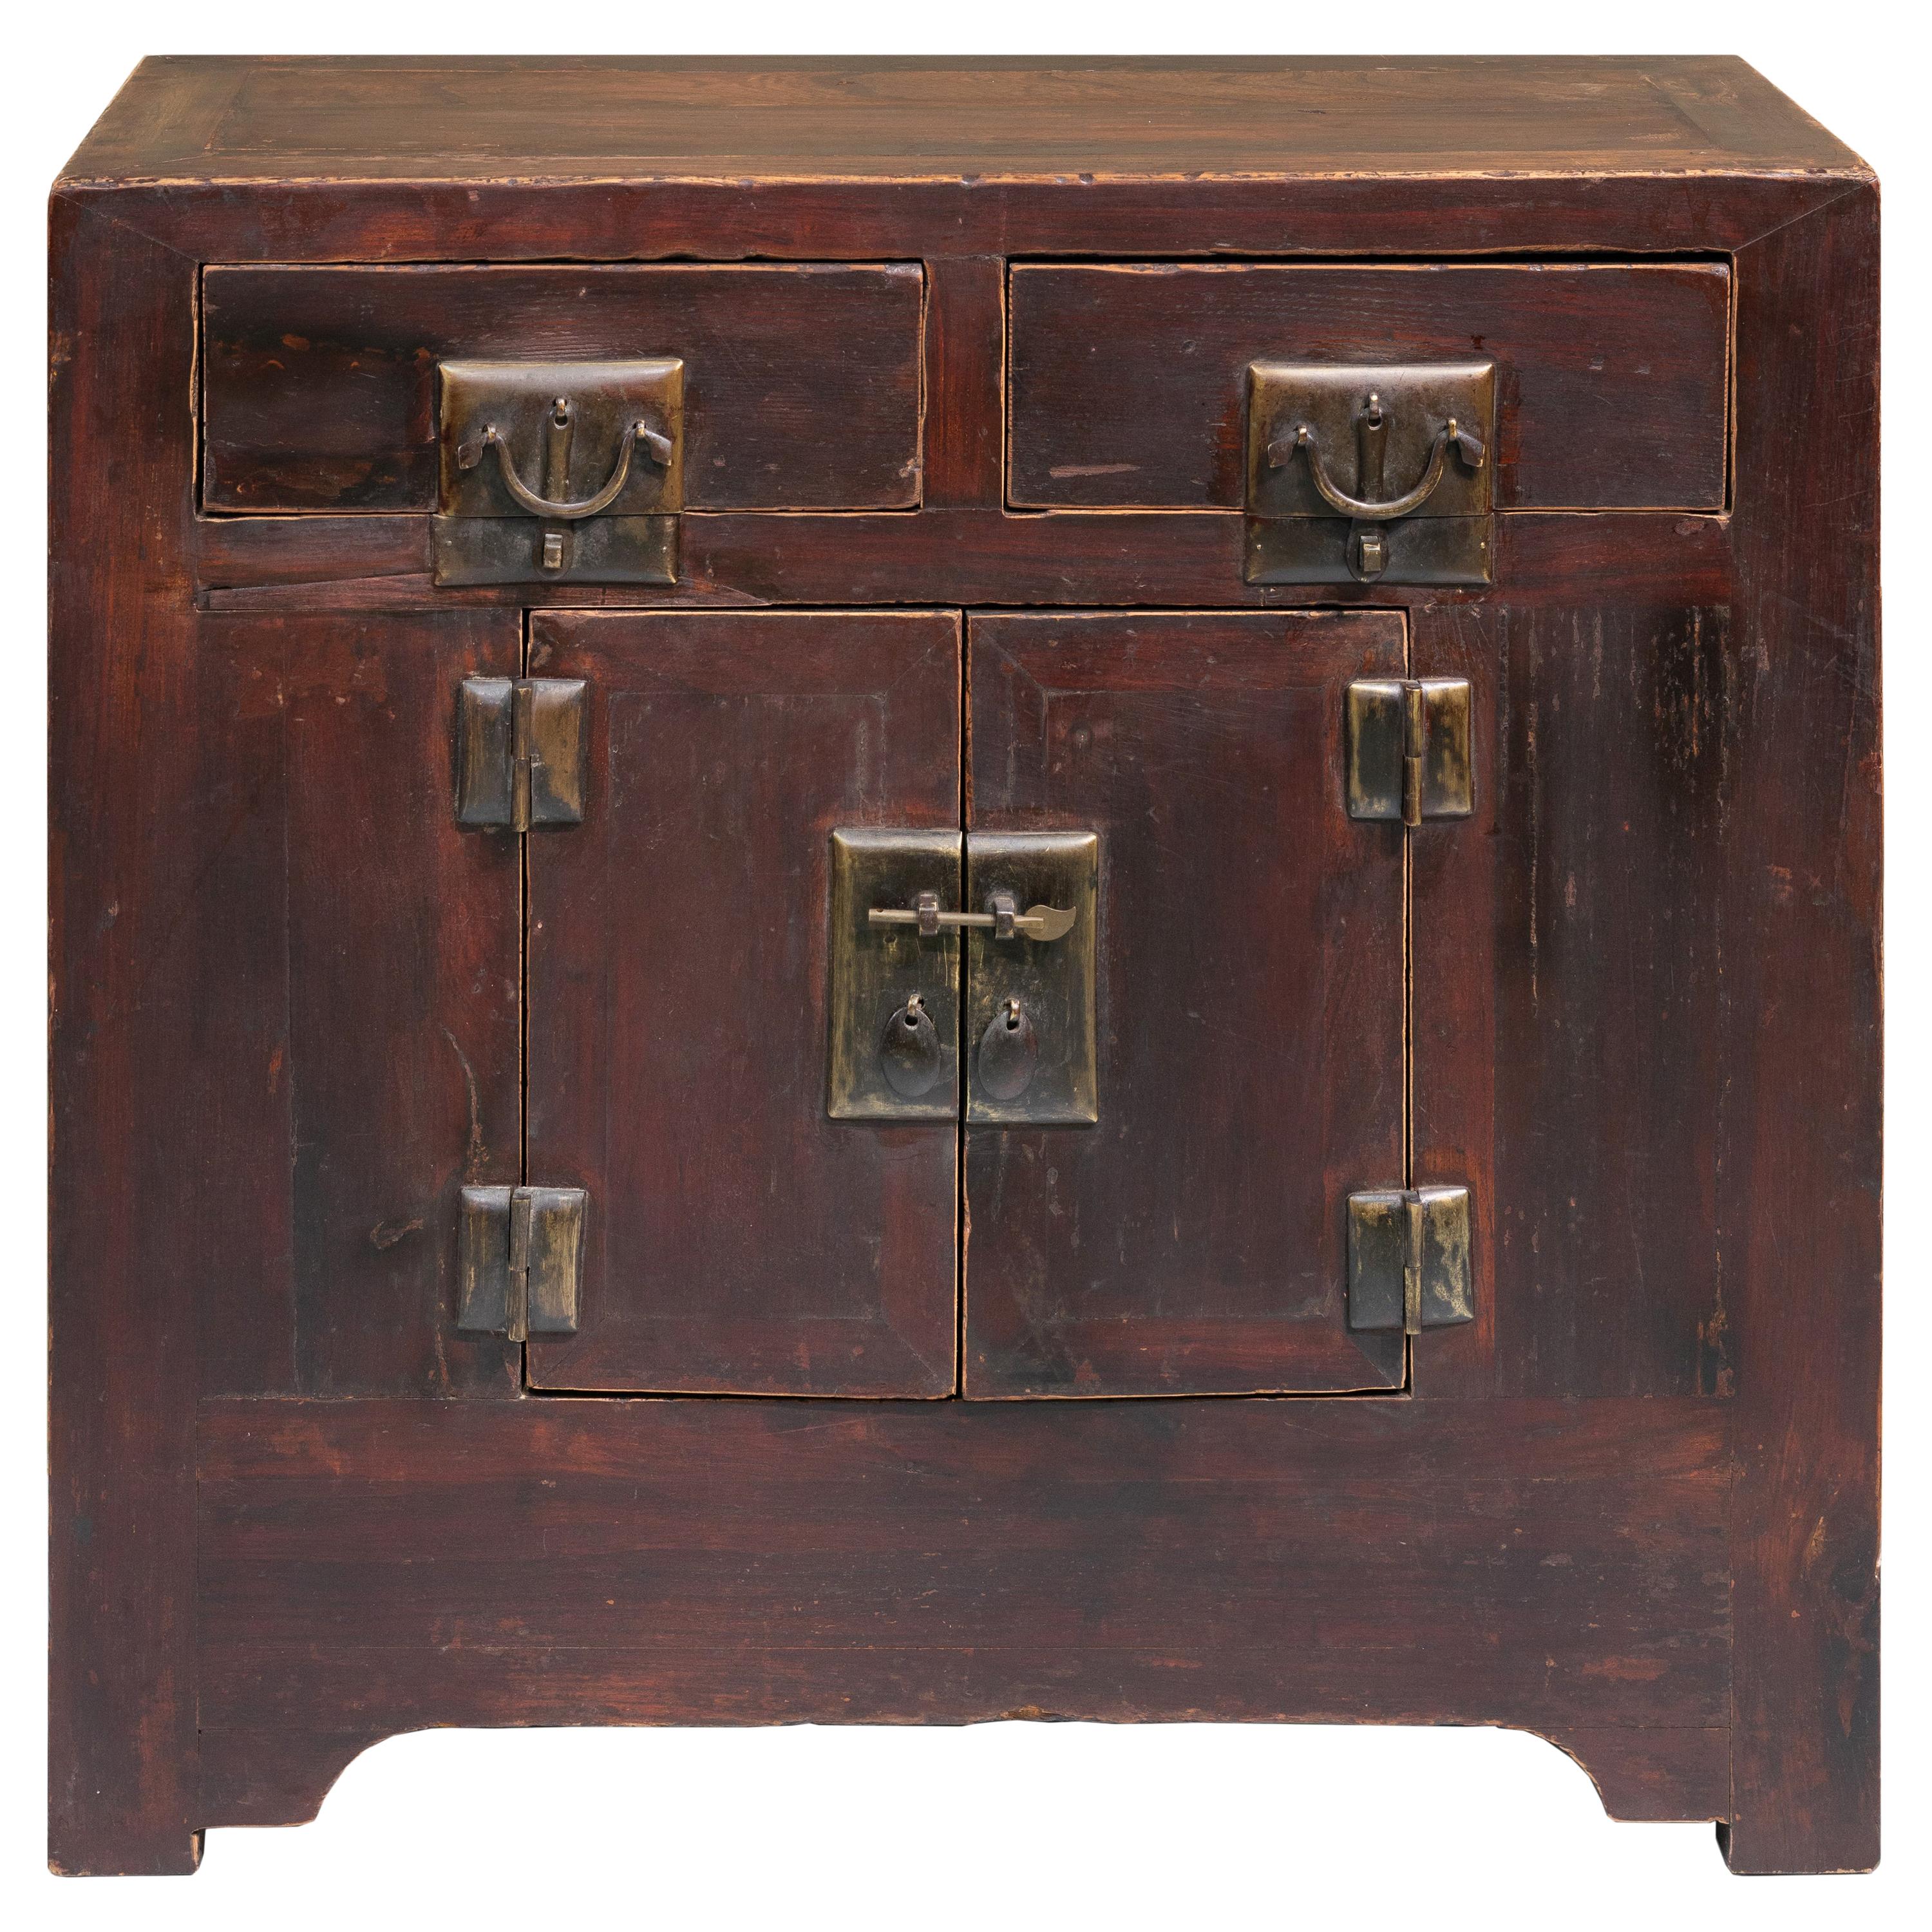 Late 19th Century Reddish Brown Cabinet from Shanxi, China